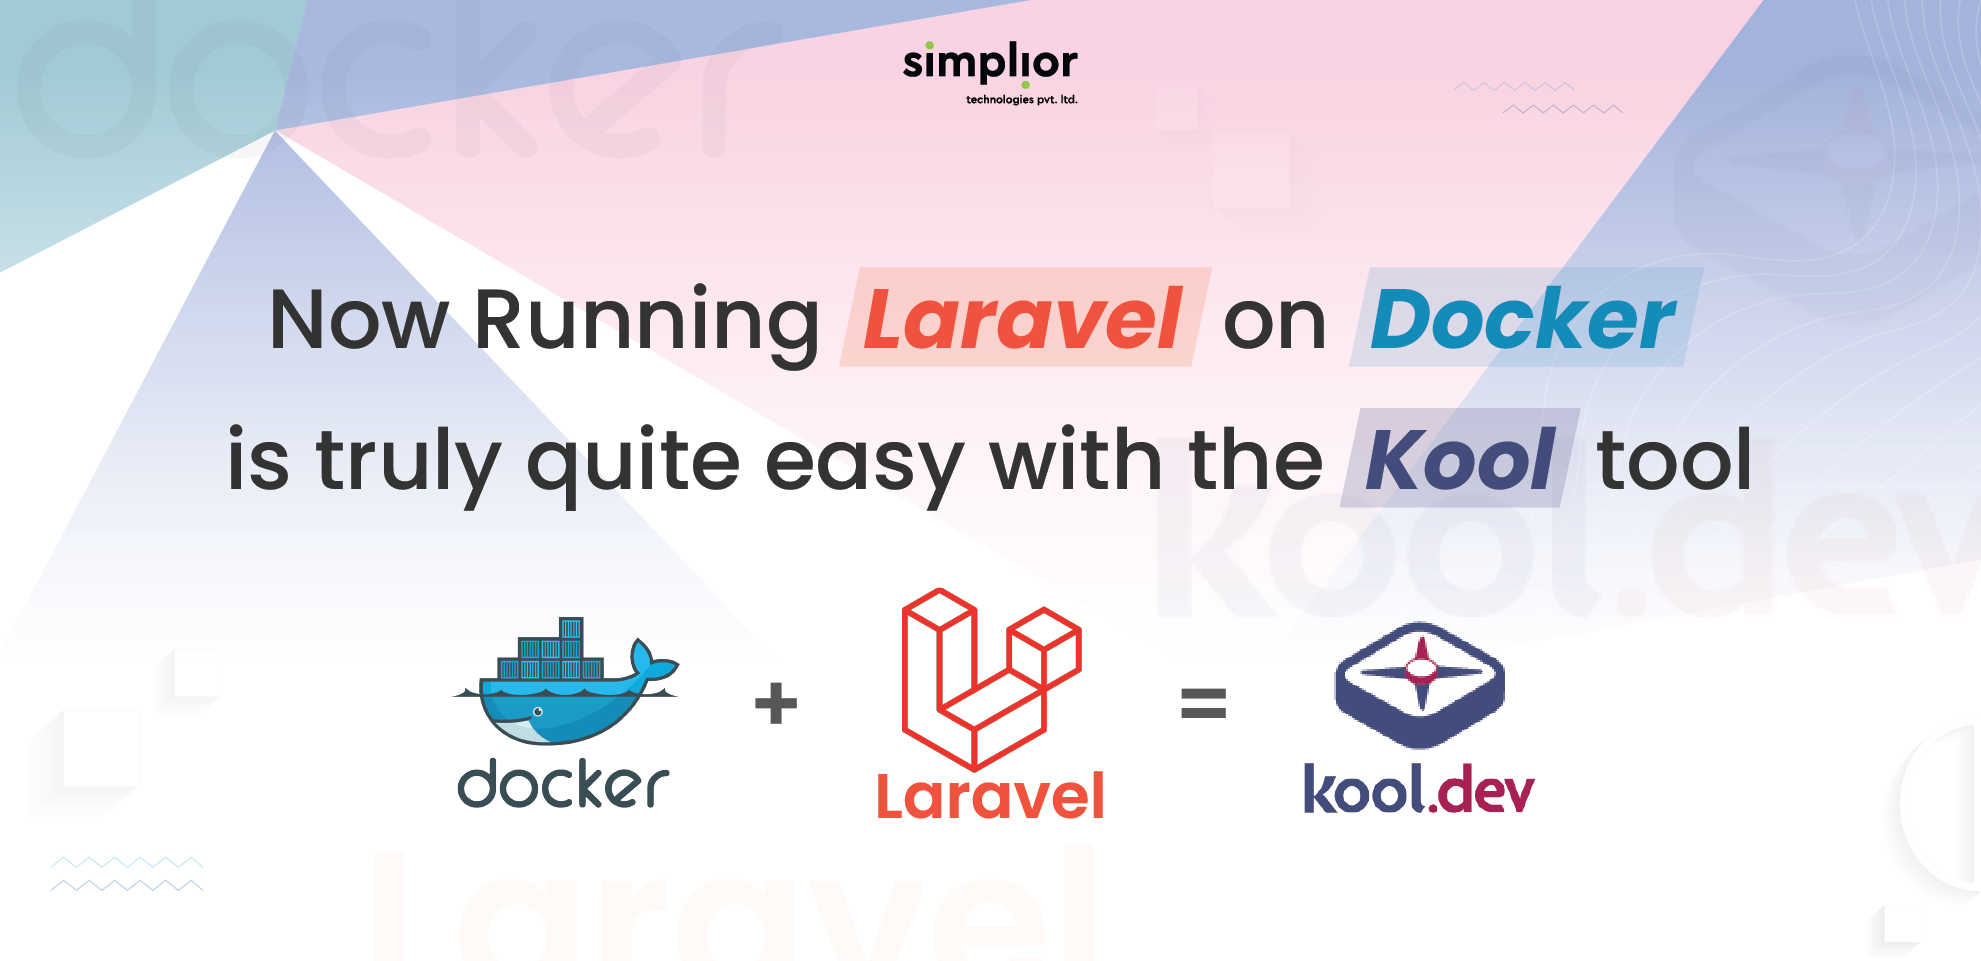 Now Running Laravel On Docker Is Truly Quite Easy With The Kool Tool - Simplior